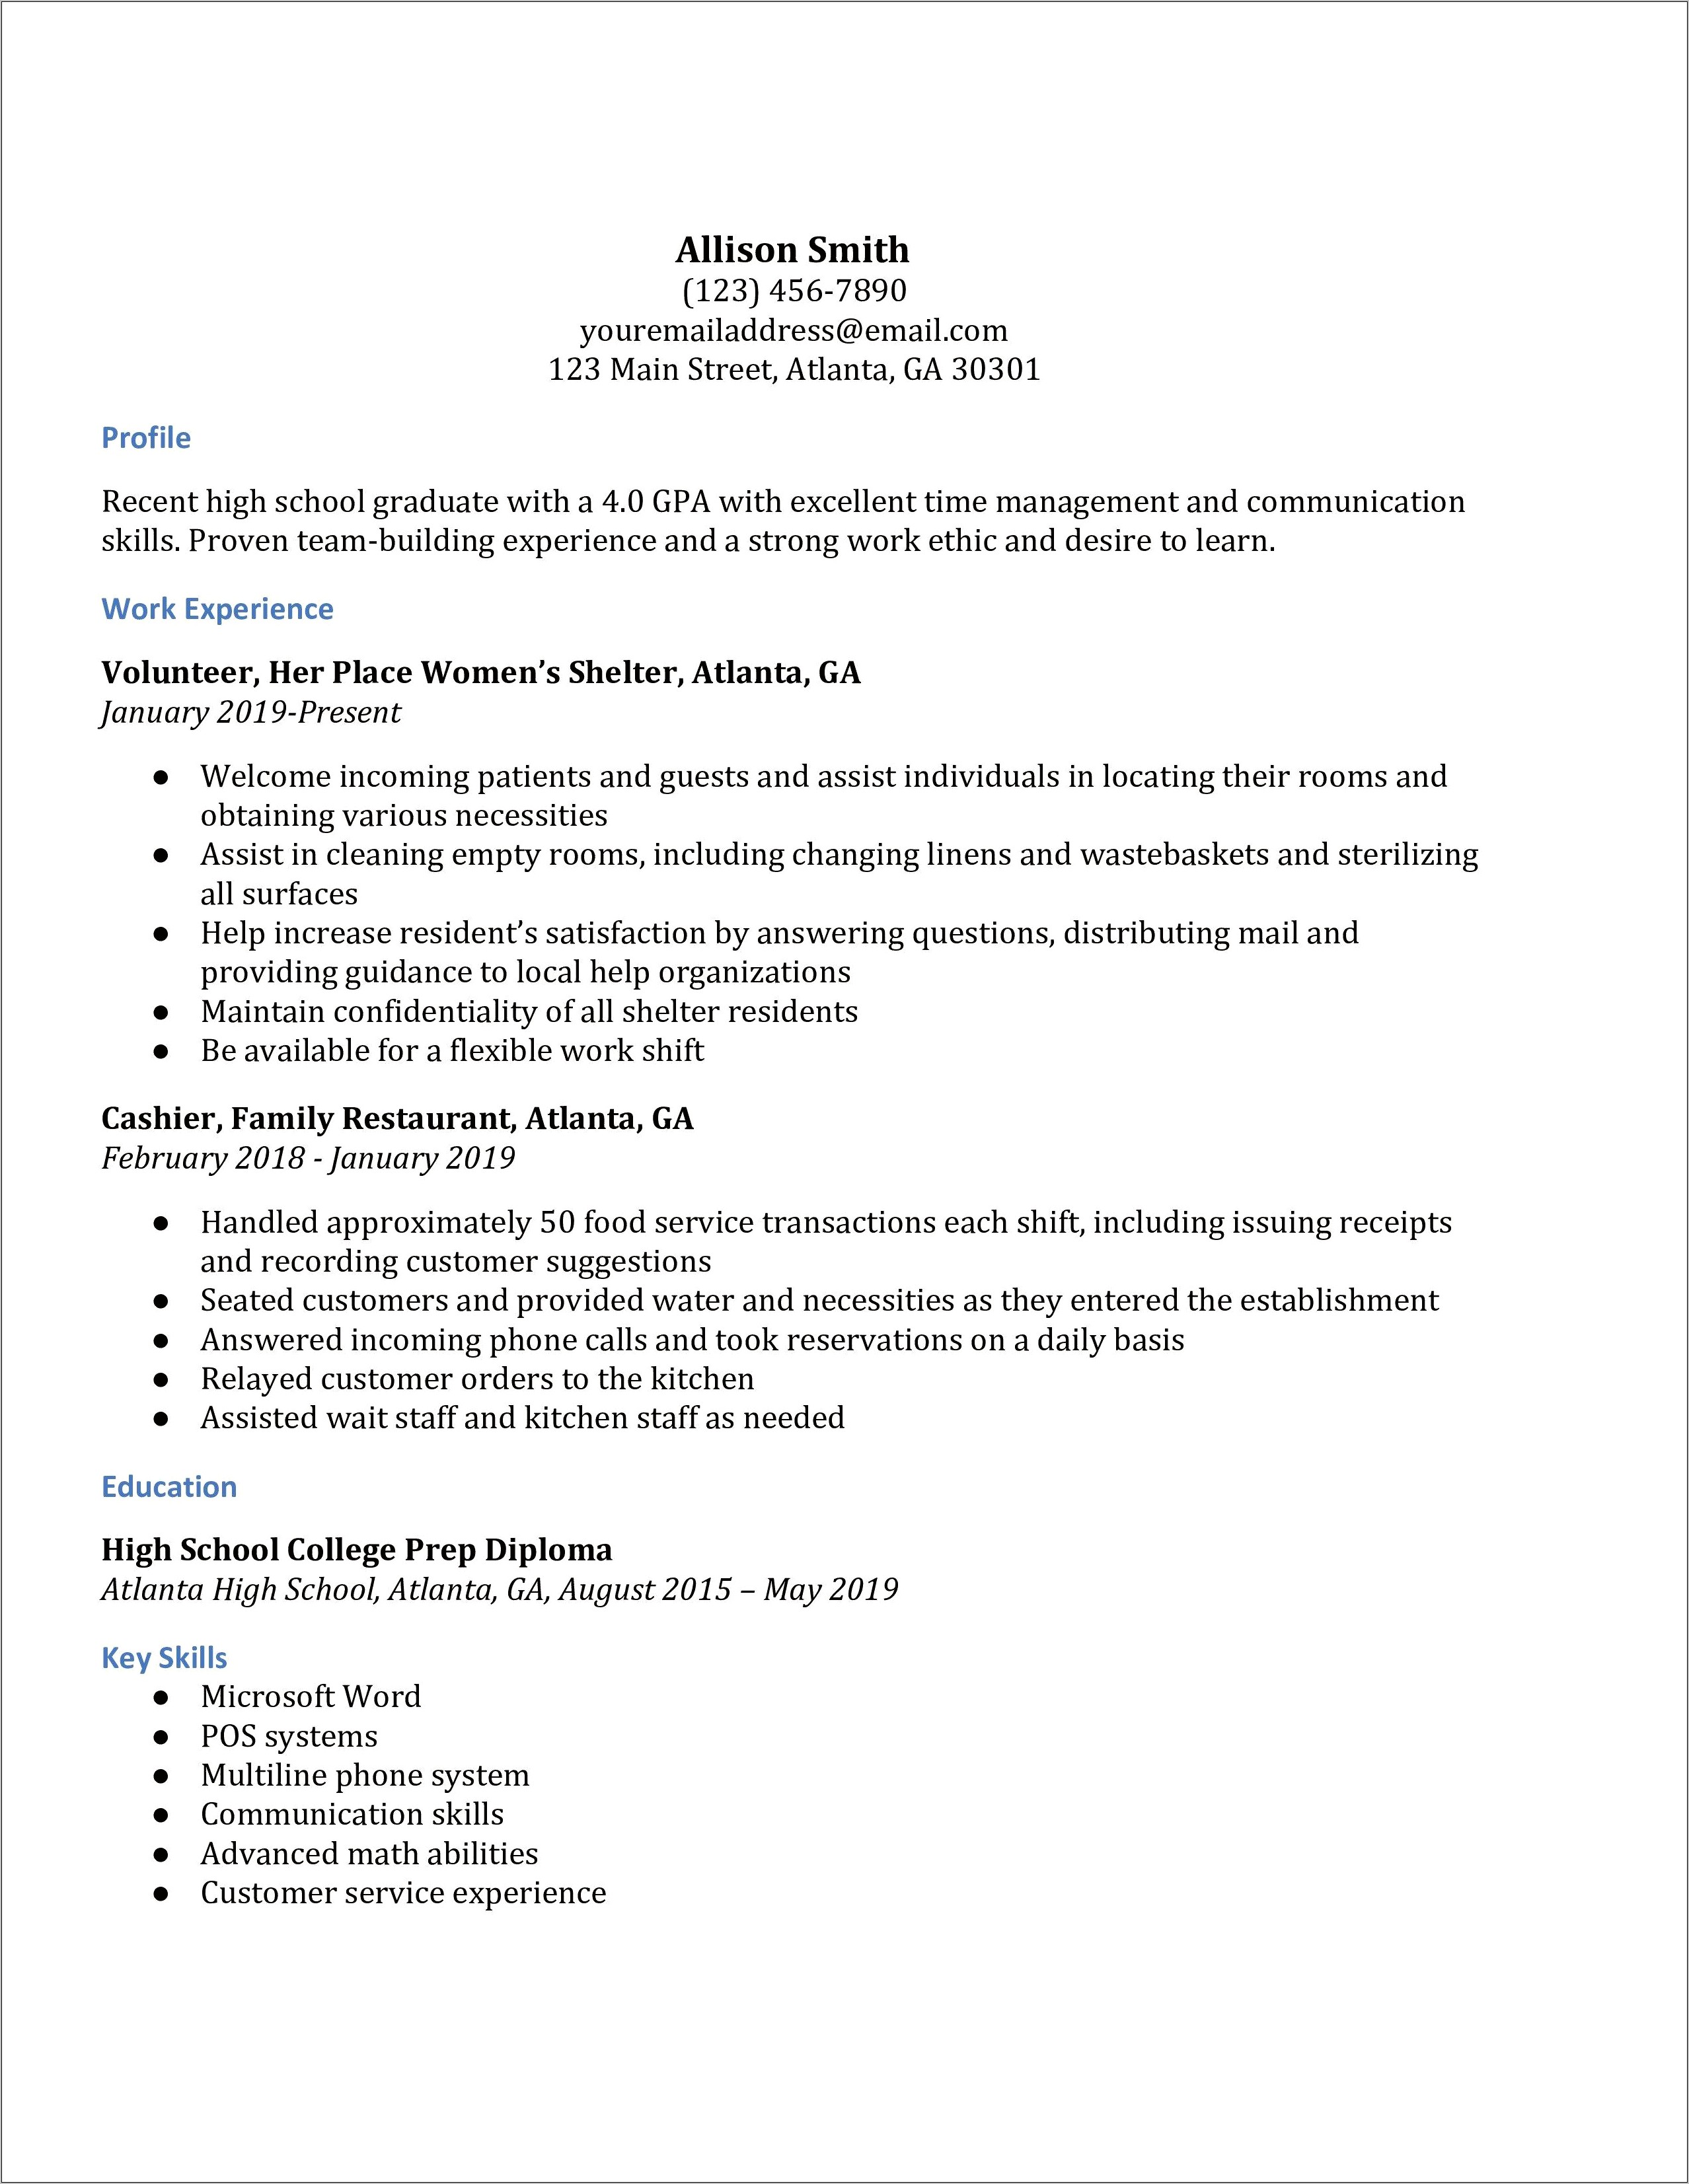 Resume For High School Graduate Examples